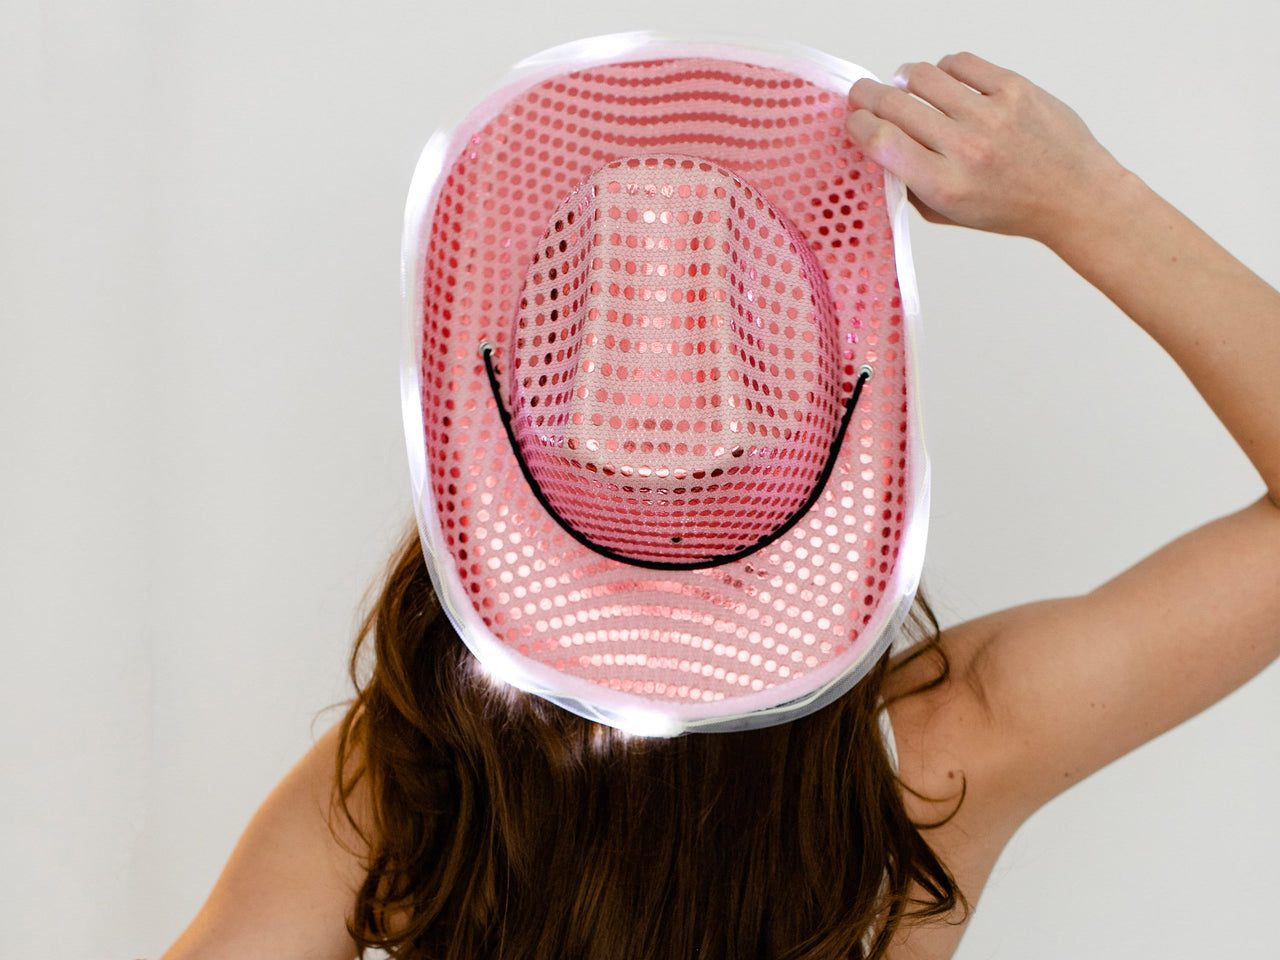 Cowgirl Hat w/ lights + Veil for bachelorette party